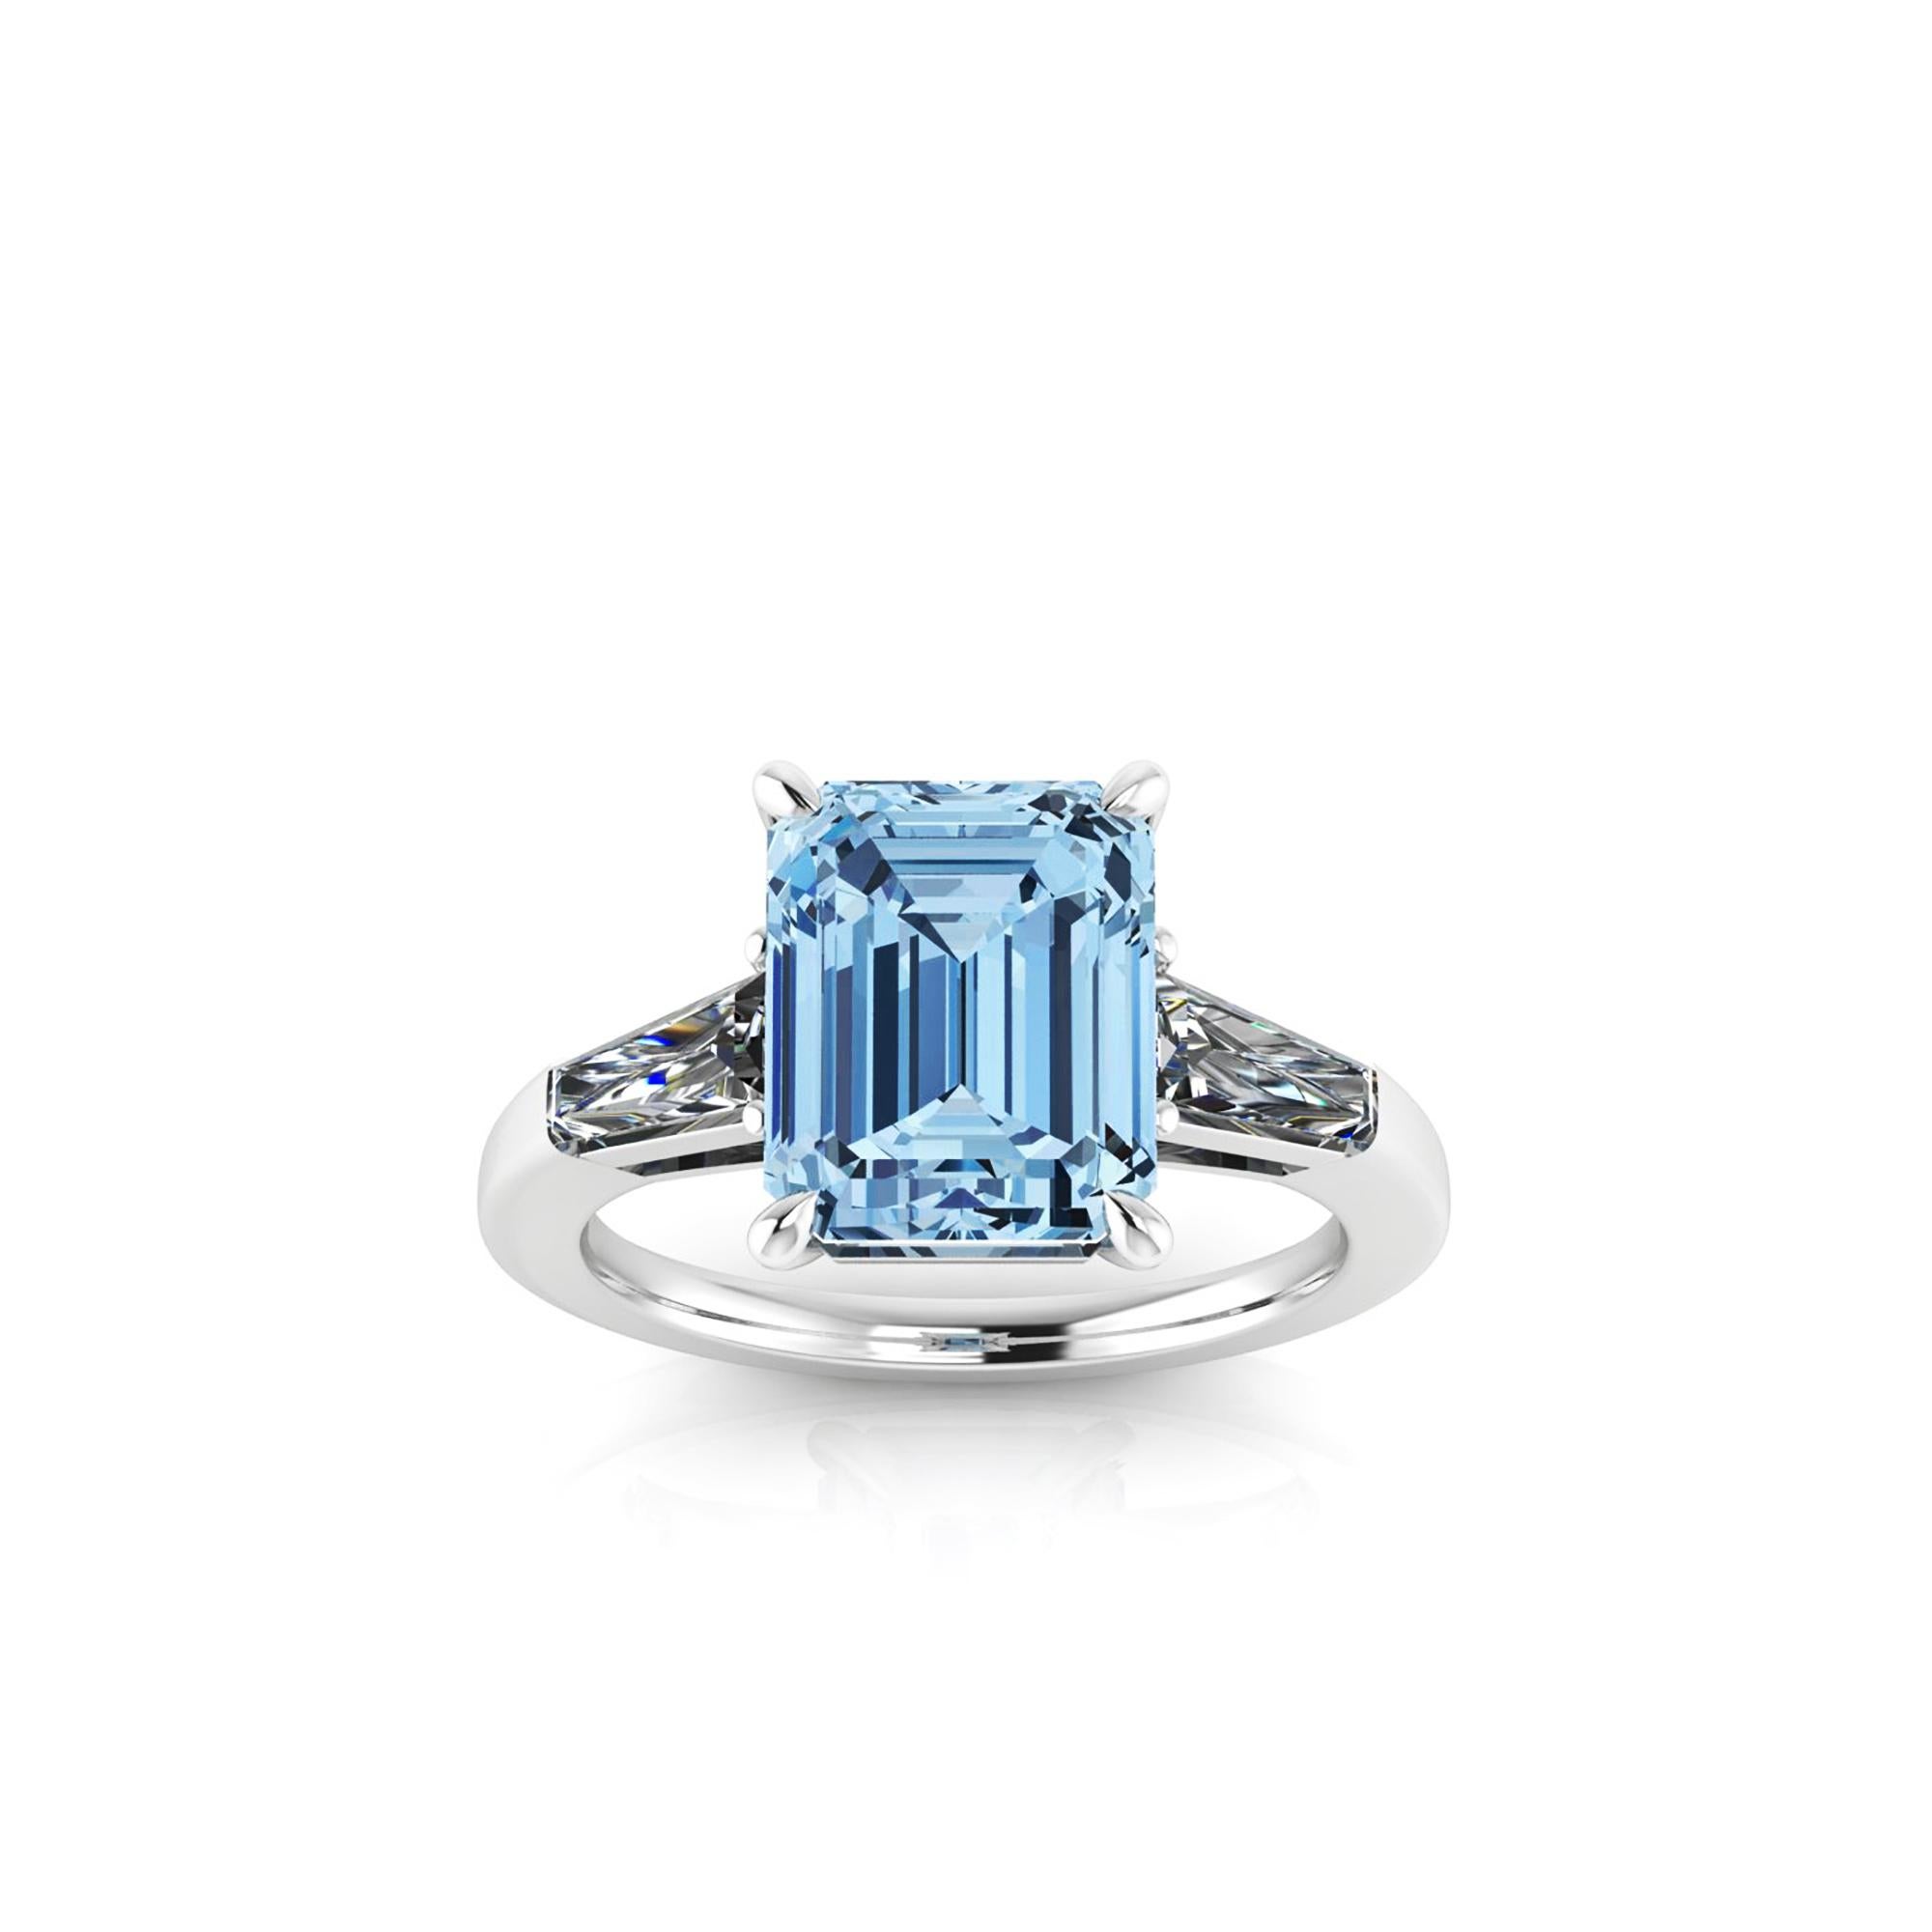 An exquisite 4.61 carat Aquamarine, emerald cut, very high quality color, eye clean gem, accompanied by two, tapered baguette, 0.40 carat total diamonds, G color, Vs clarity, 
set in an hand crafted, delicate and sophisticated looking platinum ring,